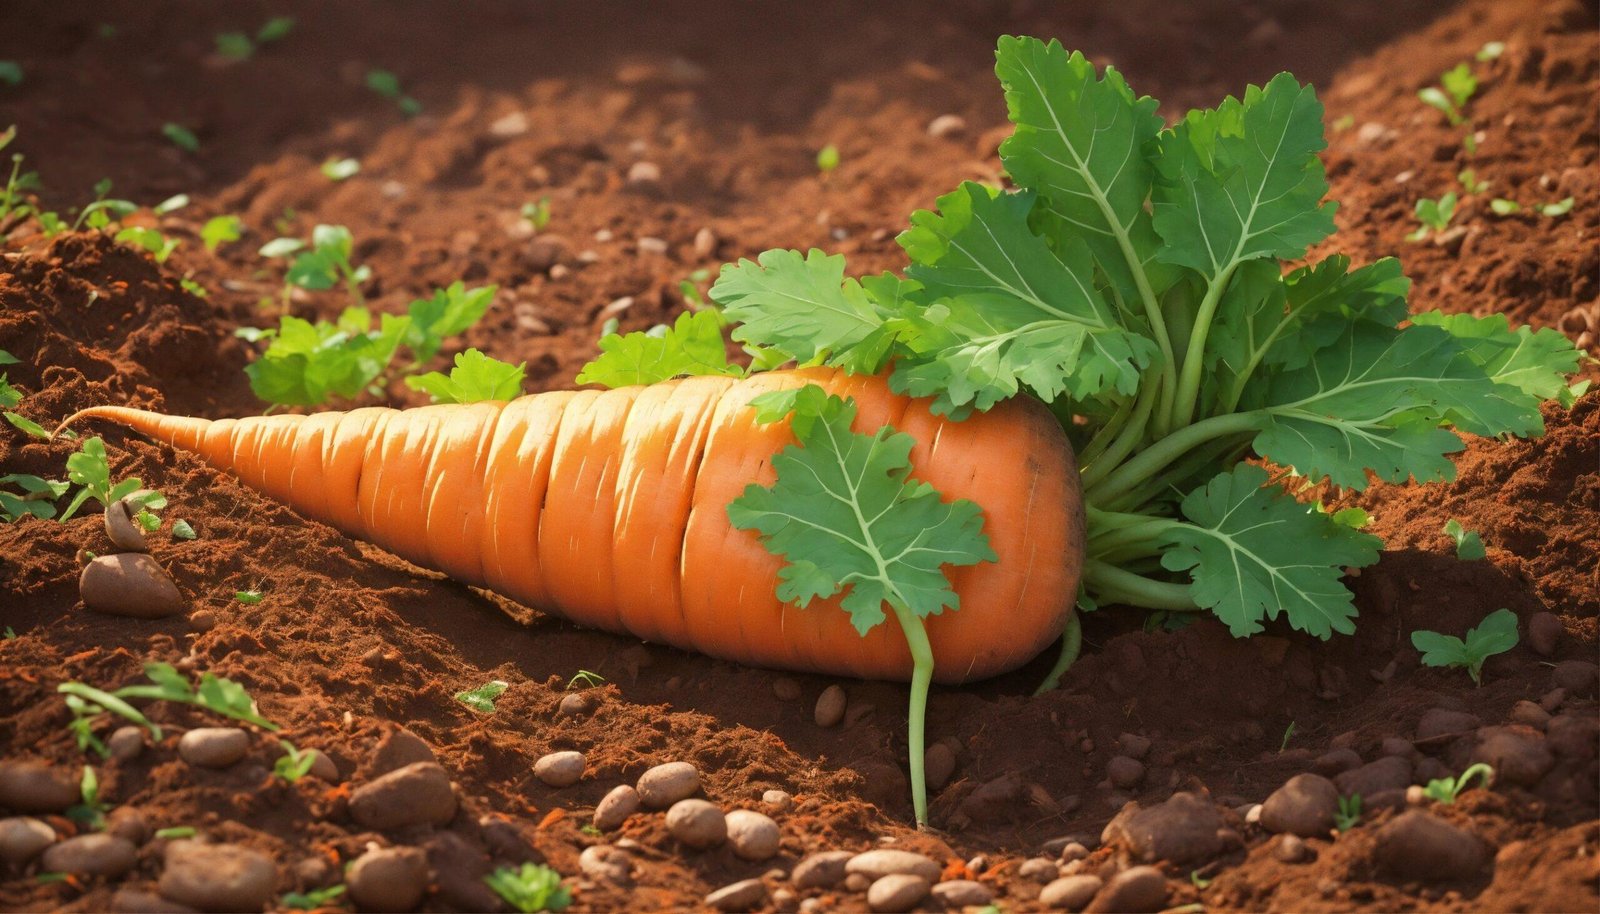 How to plant a carrot